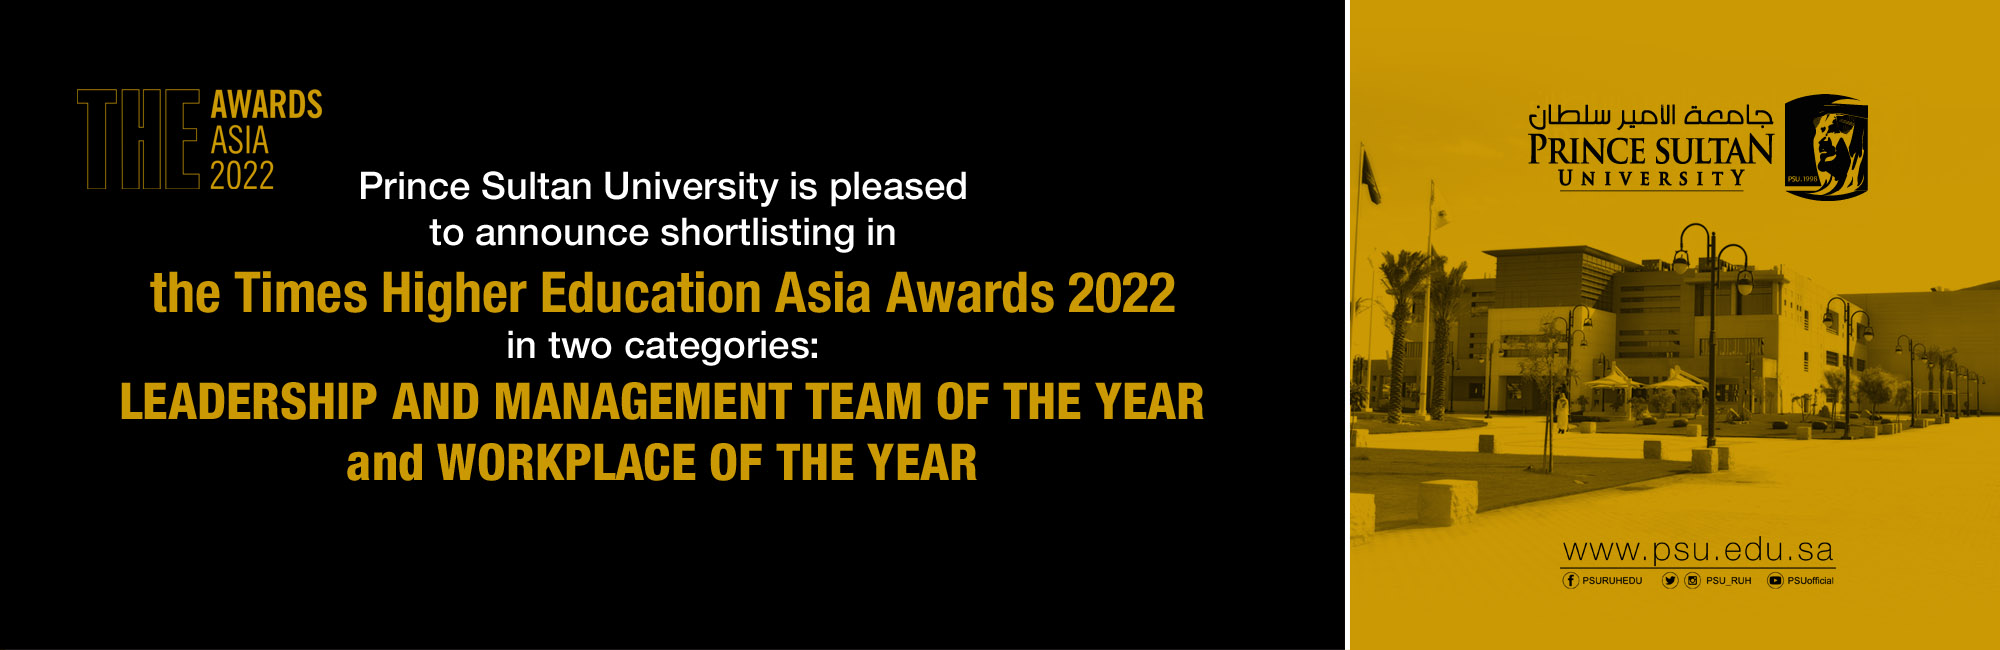 Prince Sultan University has been shortlisted in two categories of Times Higher Education Asia Awards 2022